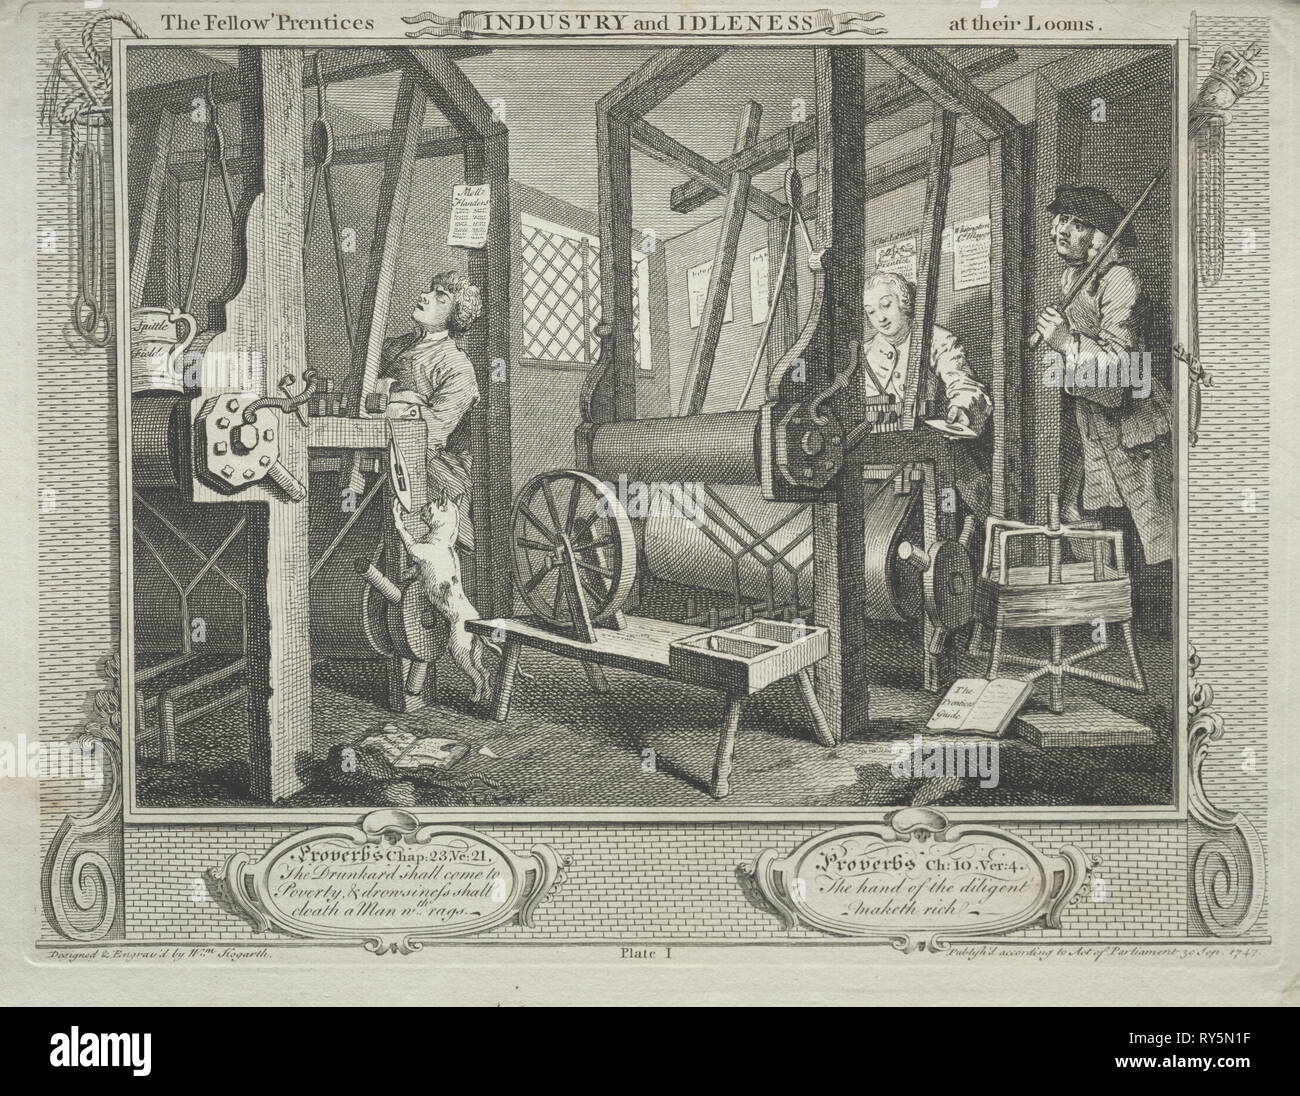 Industry and Idleness: The Fellow Prentices at their Looms, 1747. William Hogarth (British, 1697-1764). Etching Stock Photo